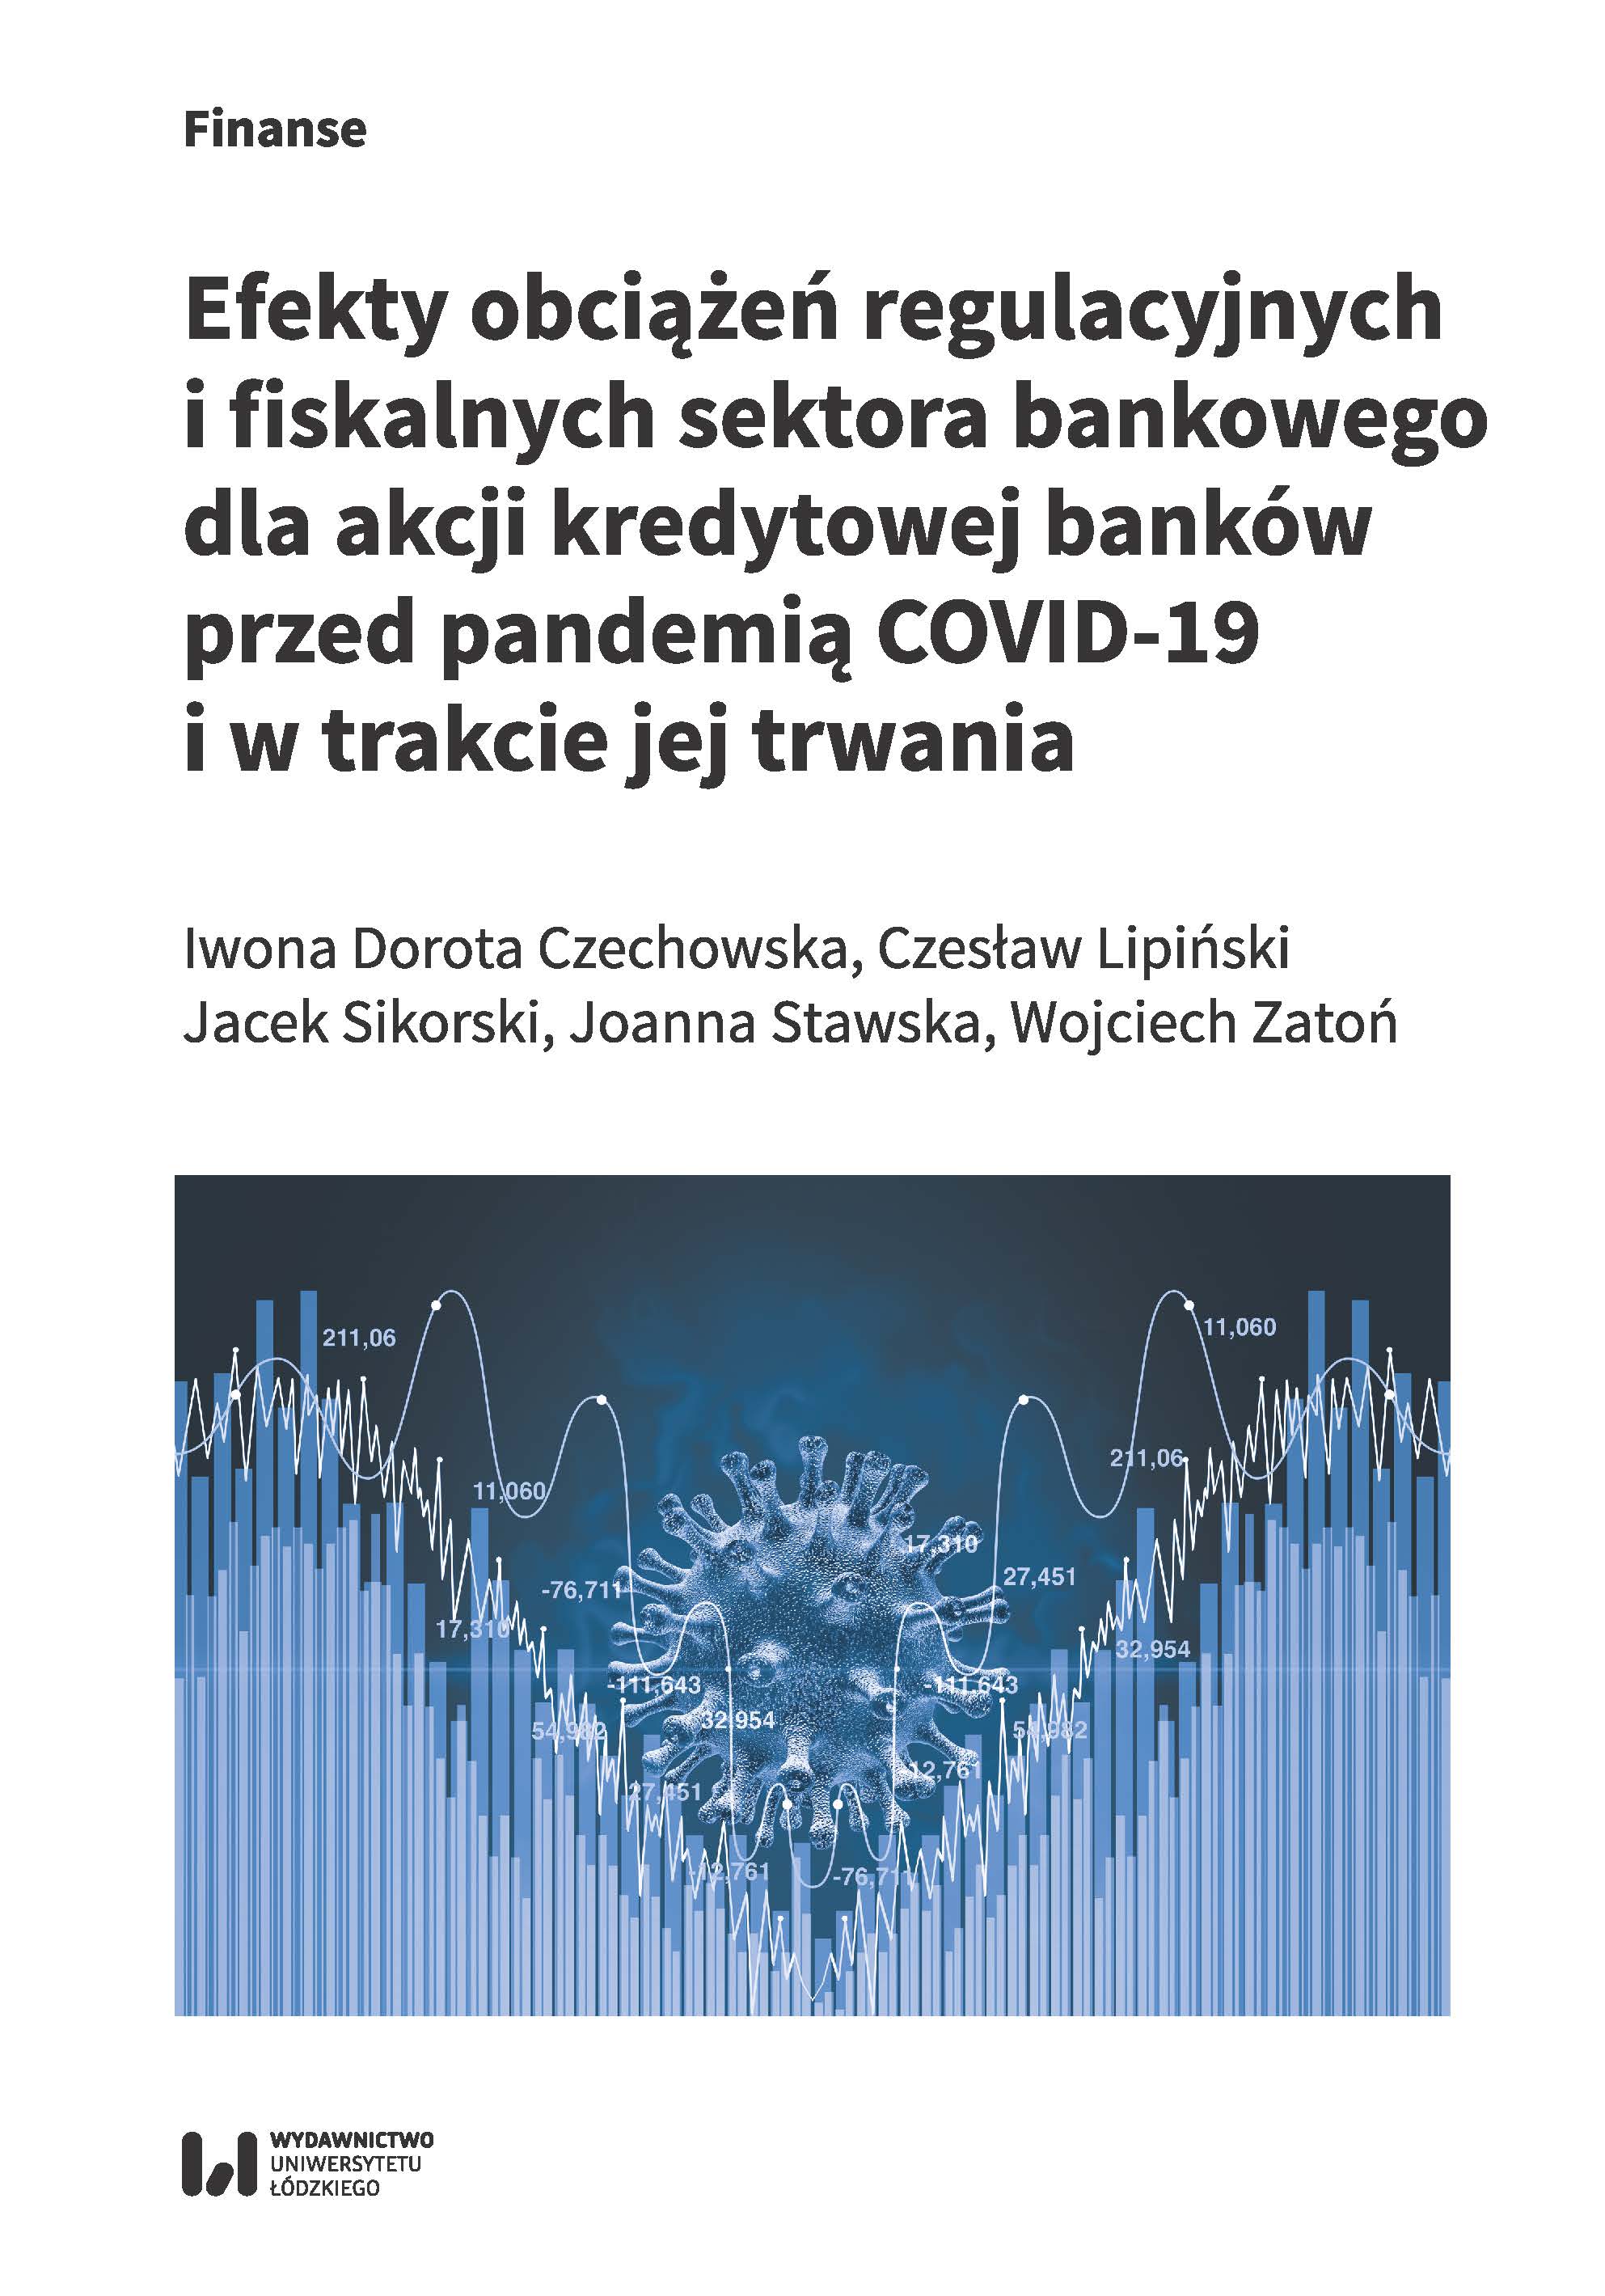 Effects of regulatory and fiscal burdens on the banking sector on bank lending before and during the COVID-19 pandemic Cover Image